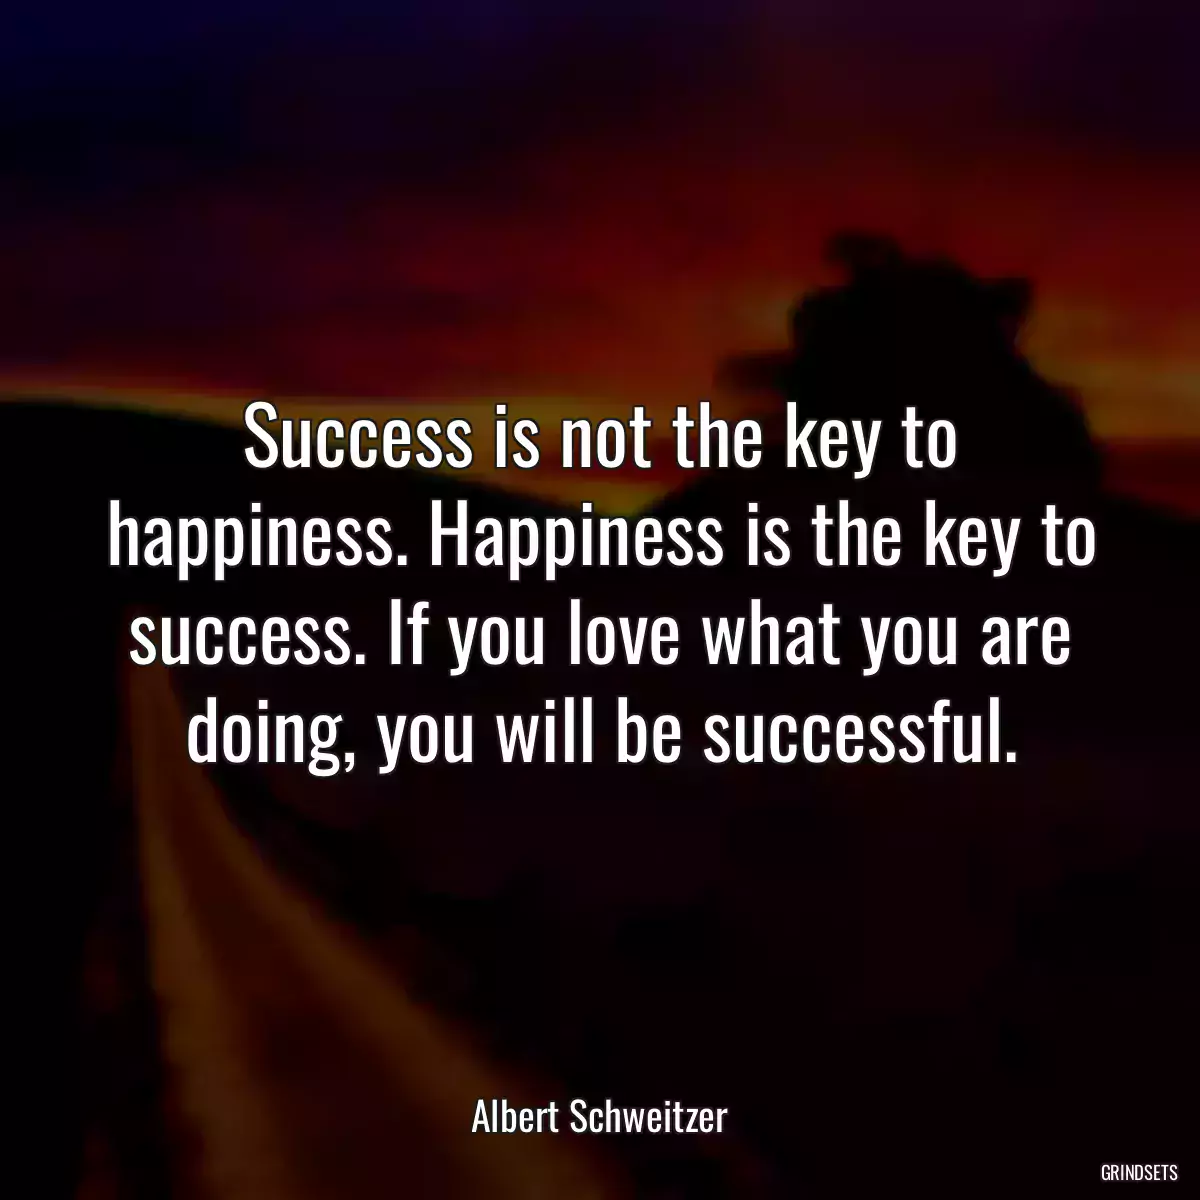 Success is not the key to happiness. Happiness is the key to success. If you love what you are doing, you will be successful.